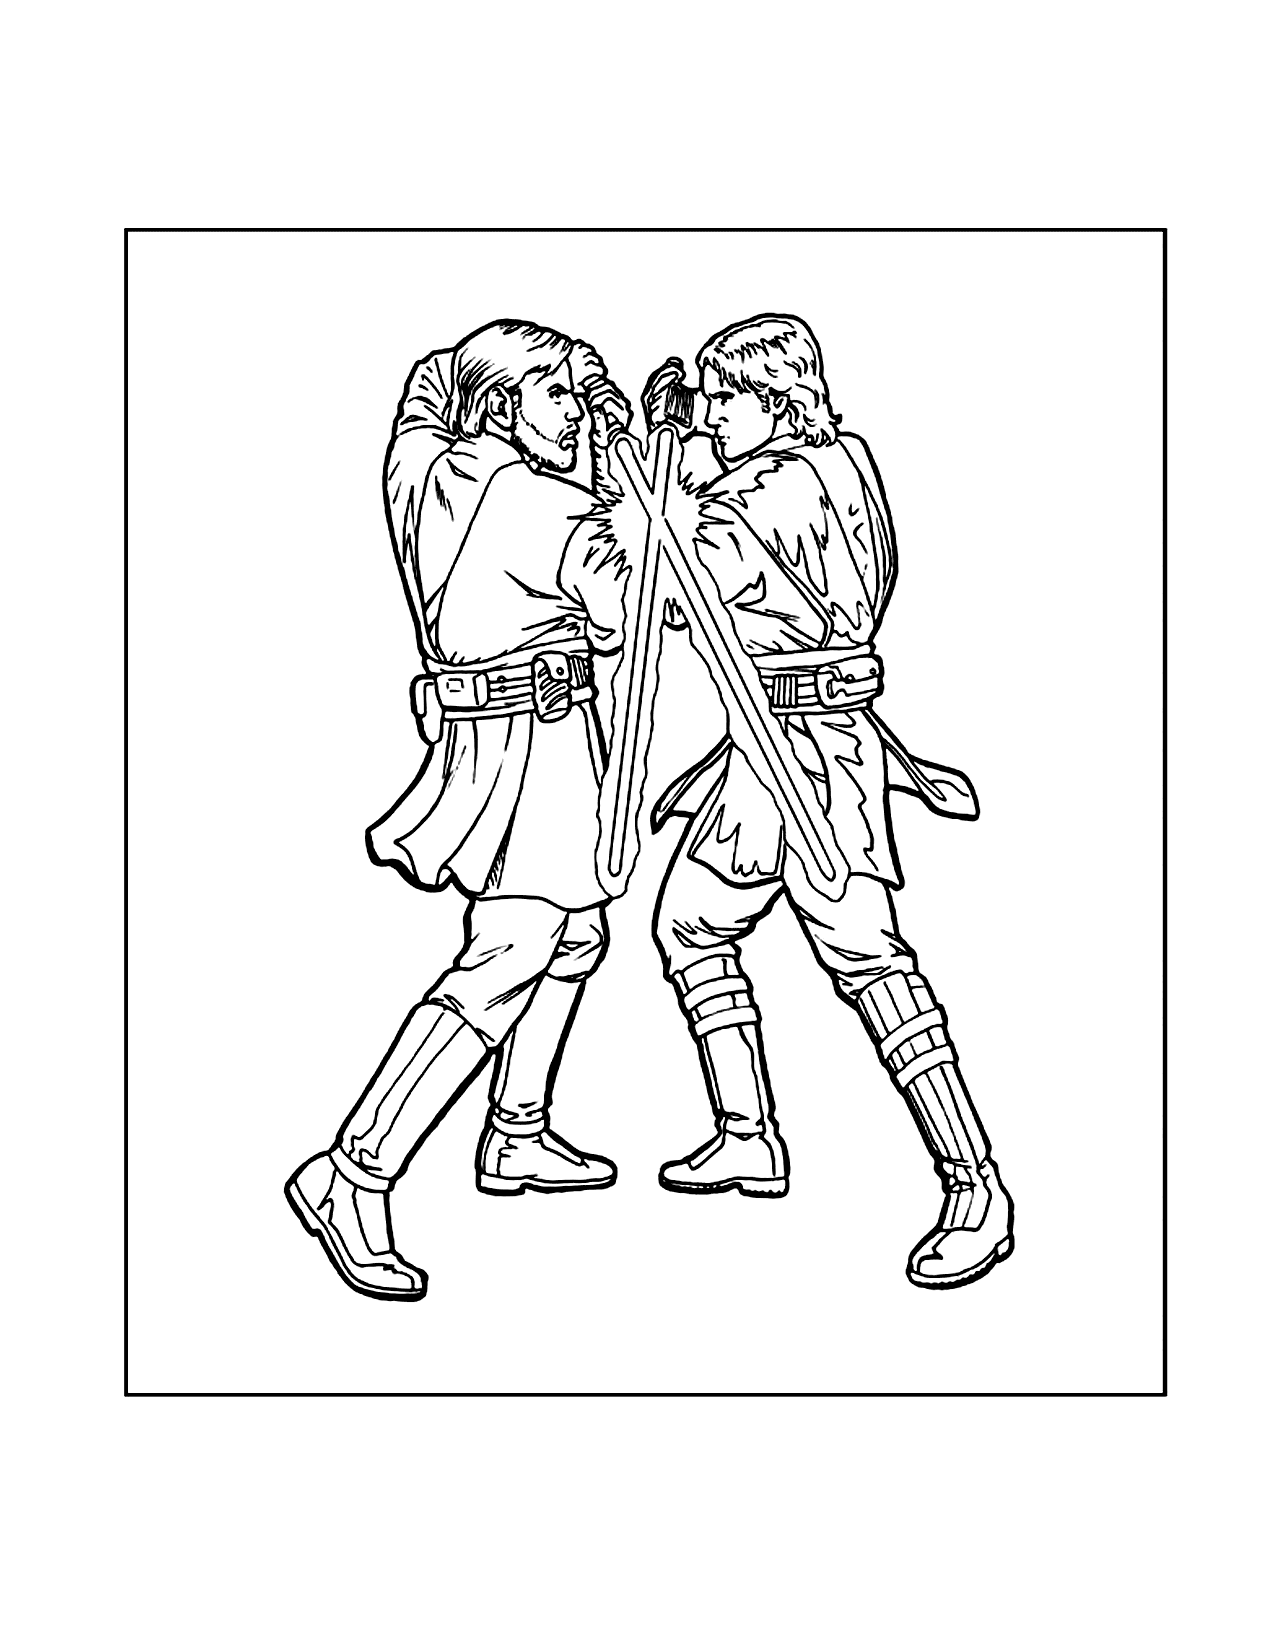 Obiwan And Anakin Fight Star Wars Coloring Page